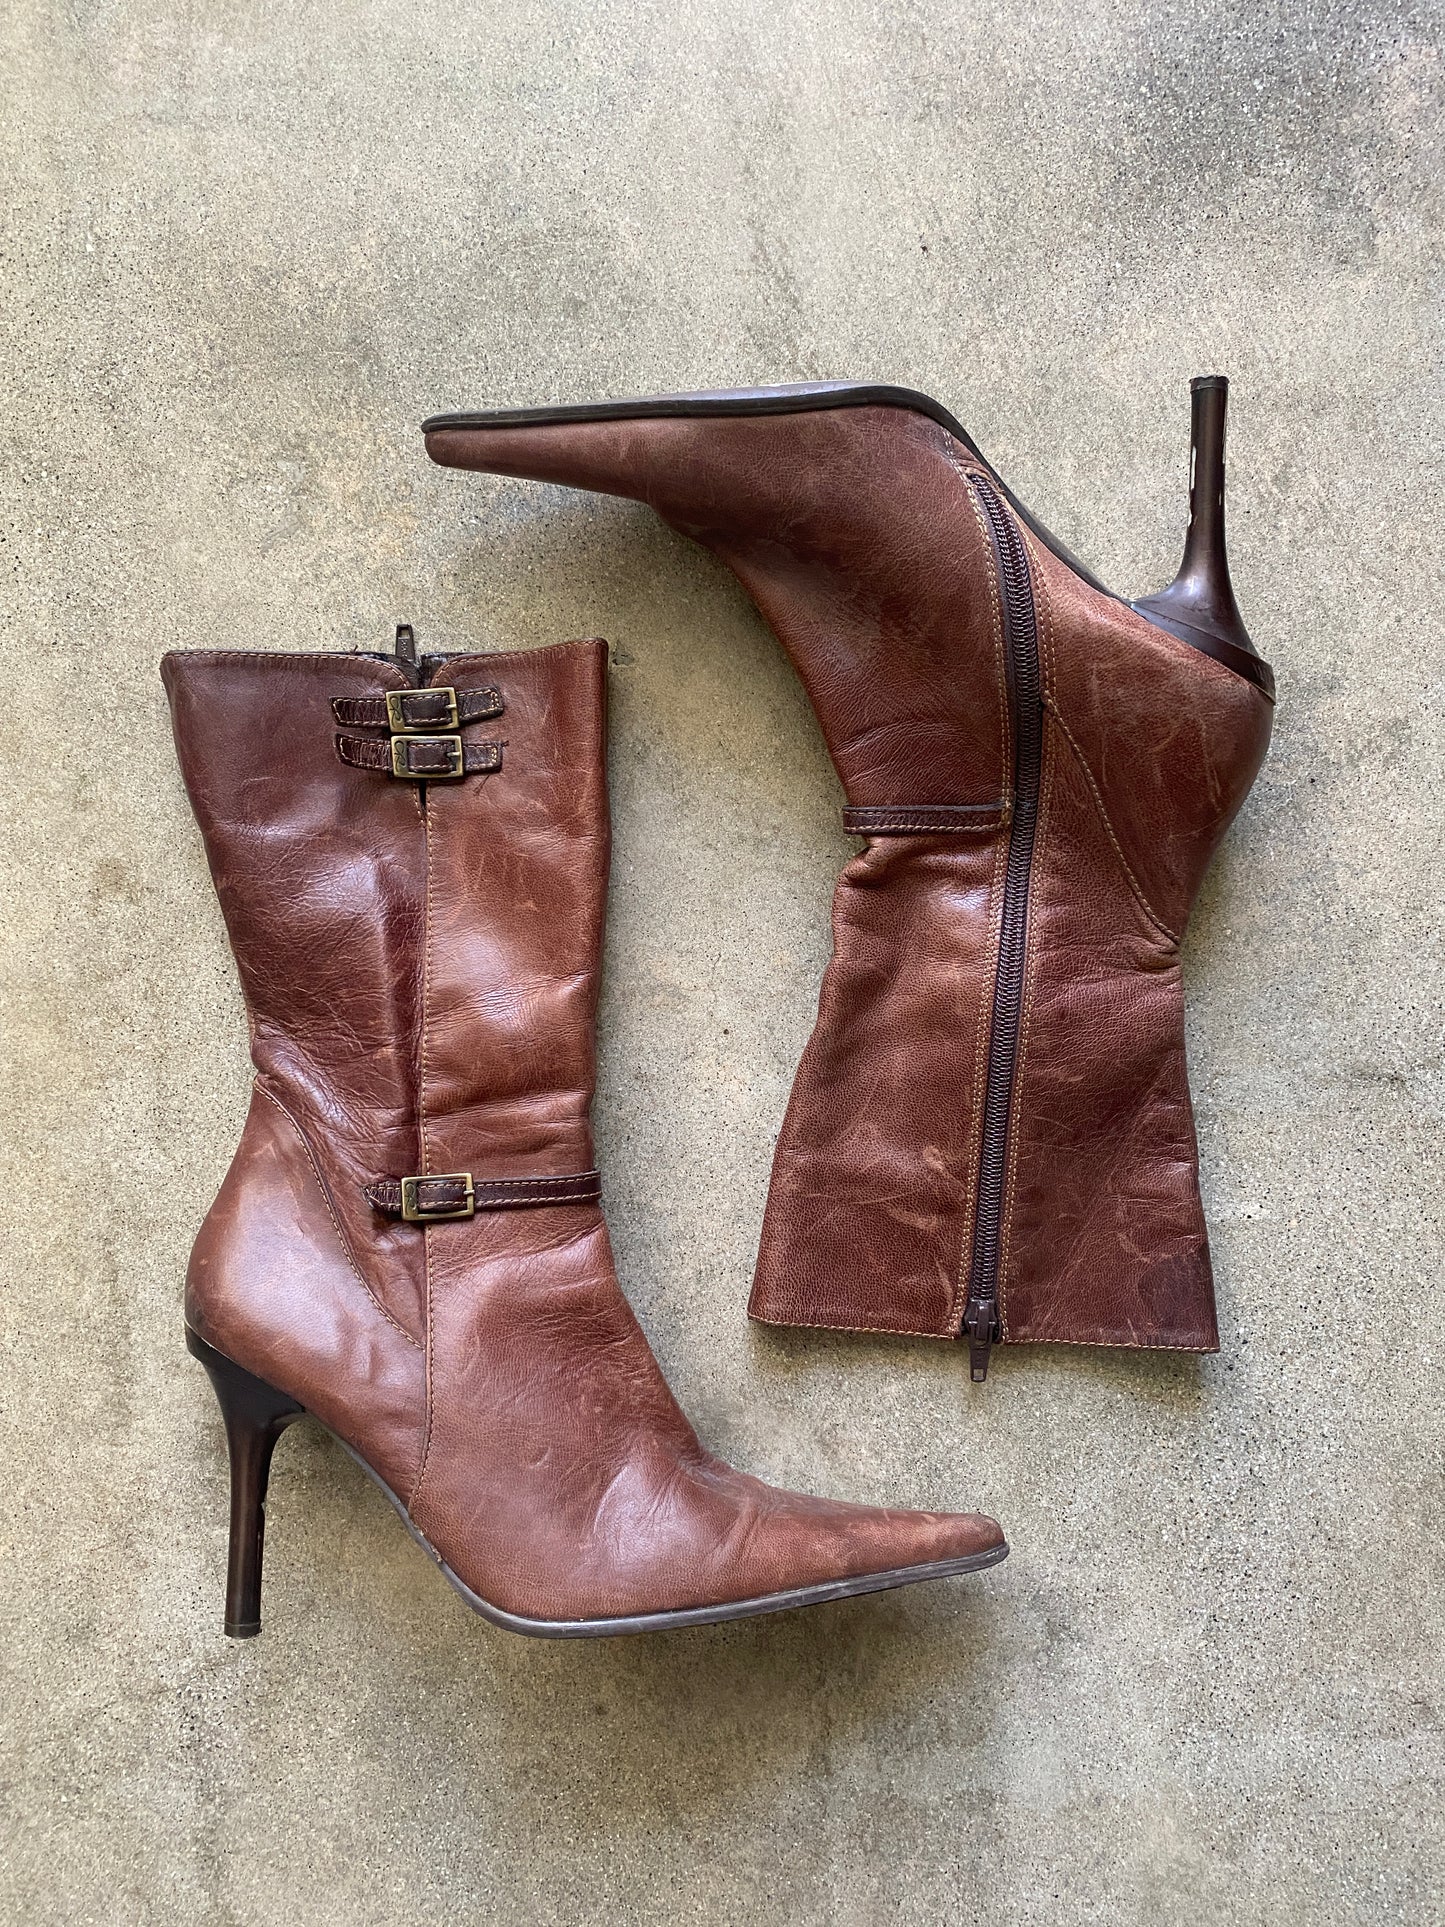 00's Distressed Tan Point Toe Booties